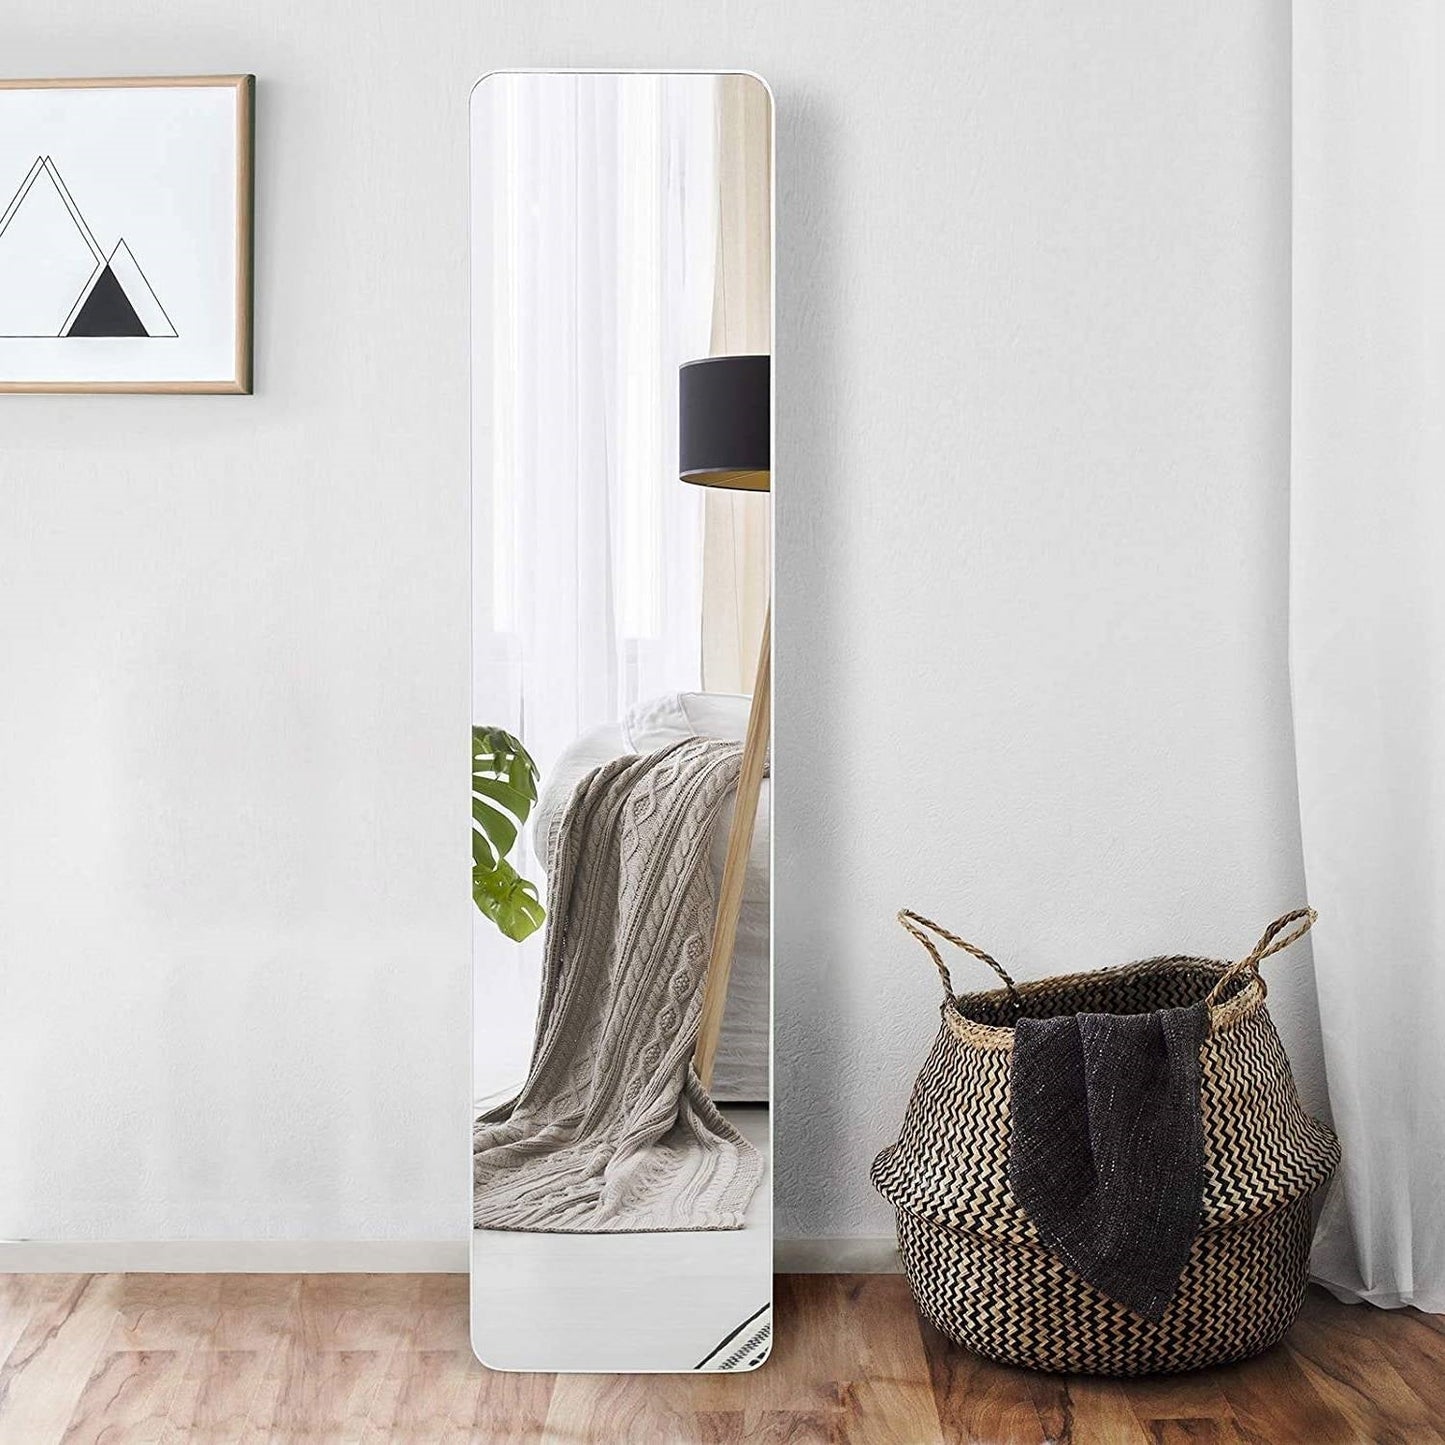 Accents > Mirrors - Modern Freestanding Full Length Floor Mirror With Stand Or Wall Mounted